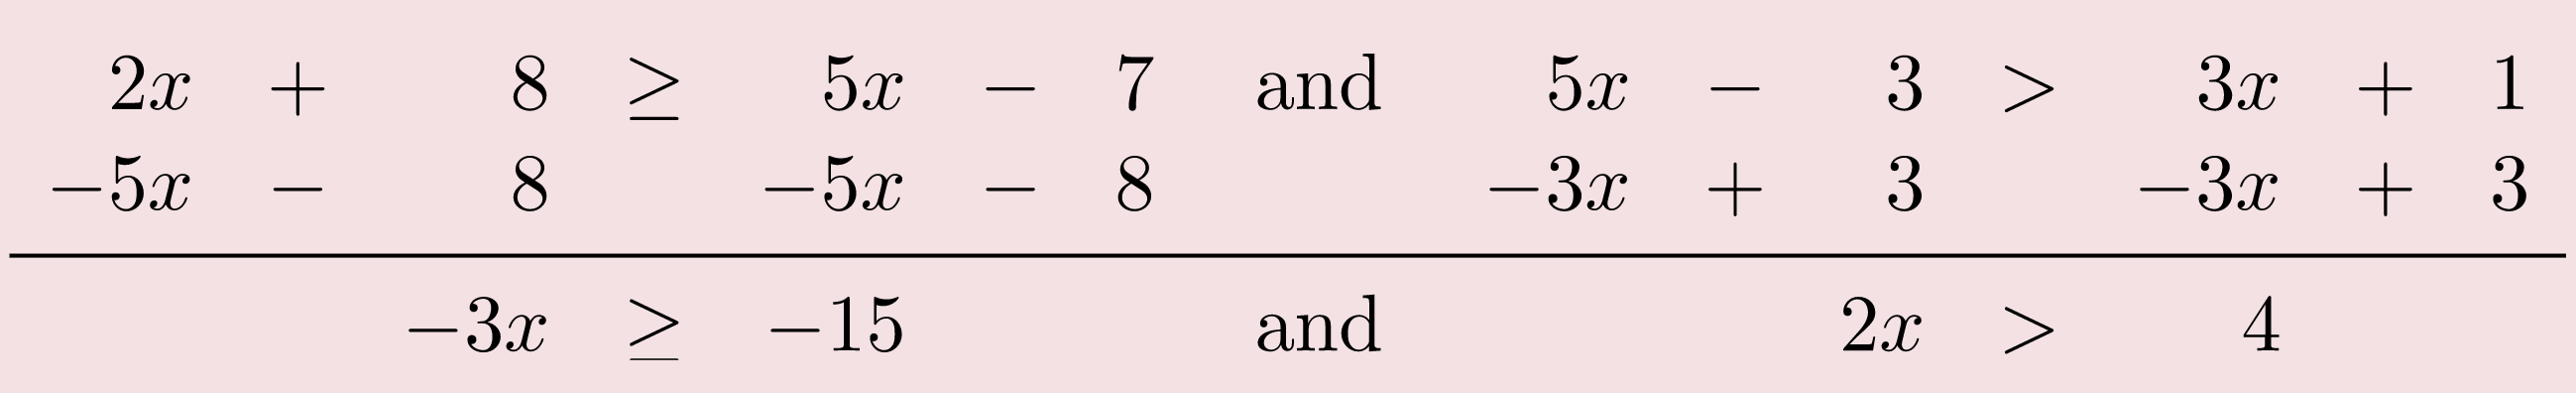 -5X minus 8 to both sides and -3X + 3 to both sides. Results in -3X is ≥ to negative 15 and 2X is greater than 4